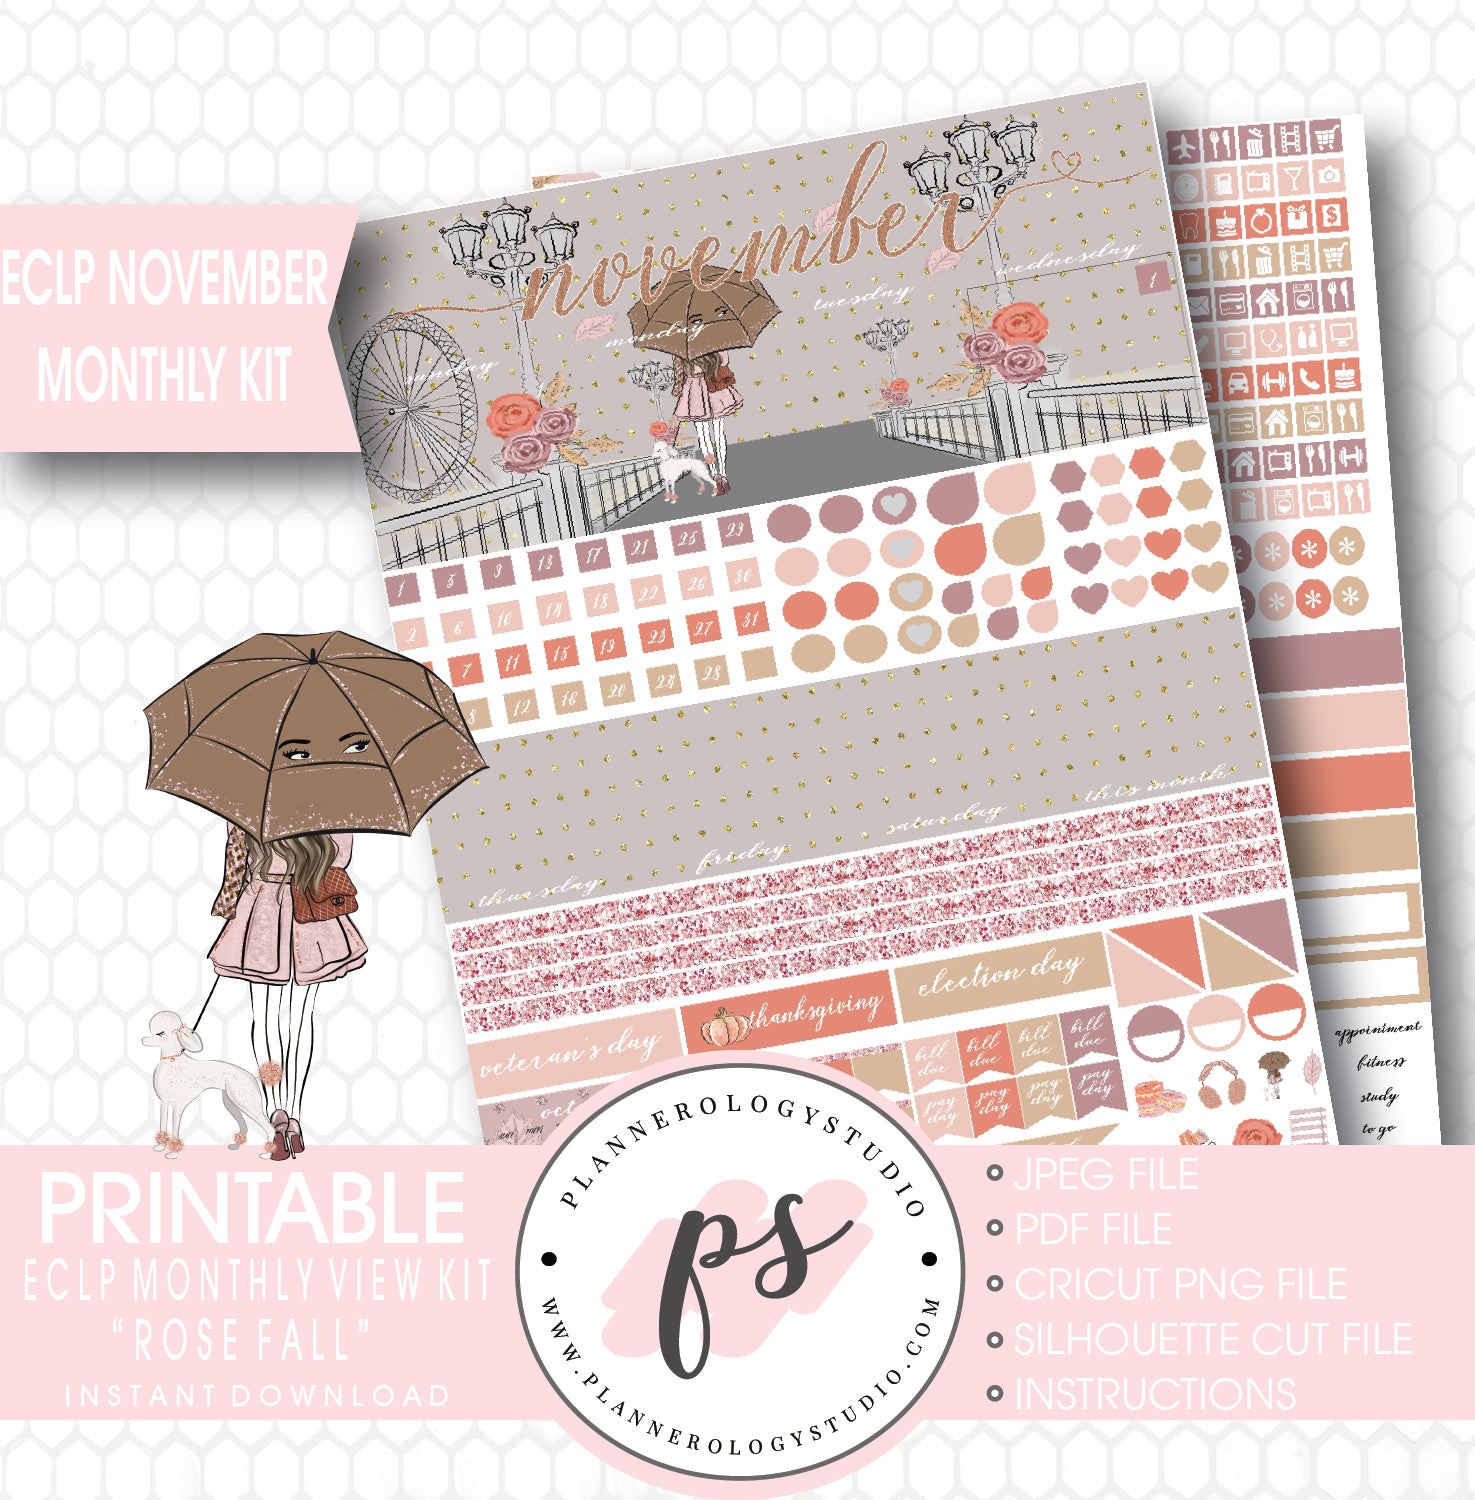 Rose Fall November 2017 Monthly View Kit Printable Planner Stickers (for use with ECLP) - Plannerologystudio